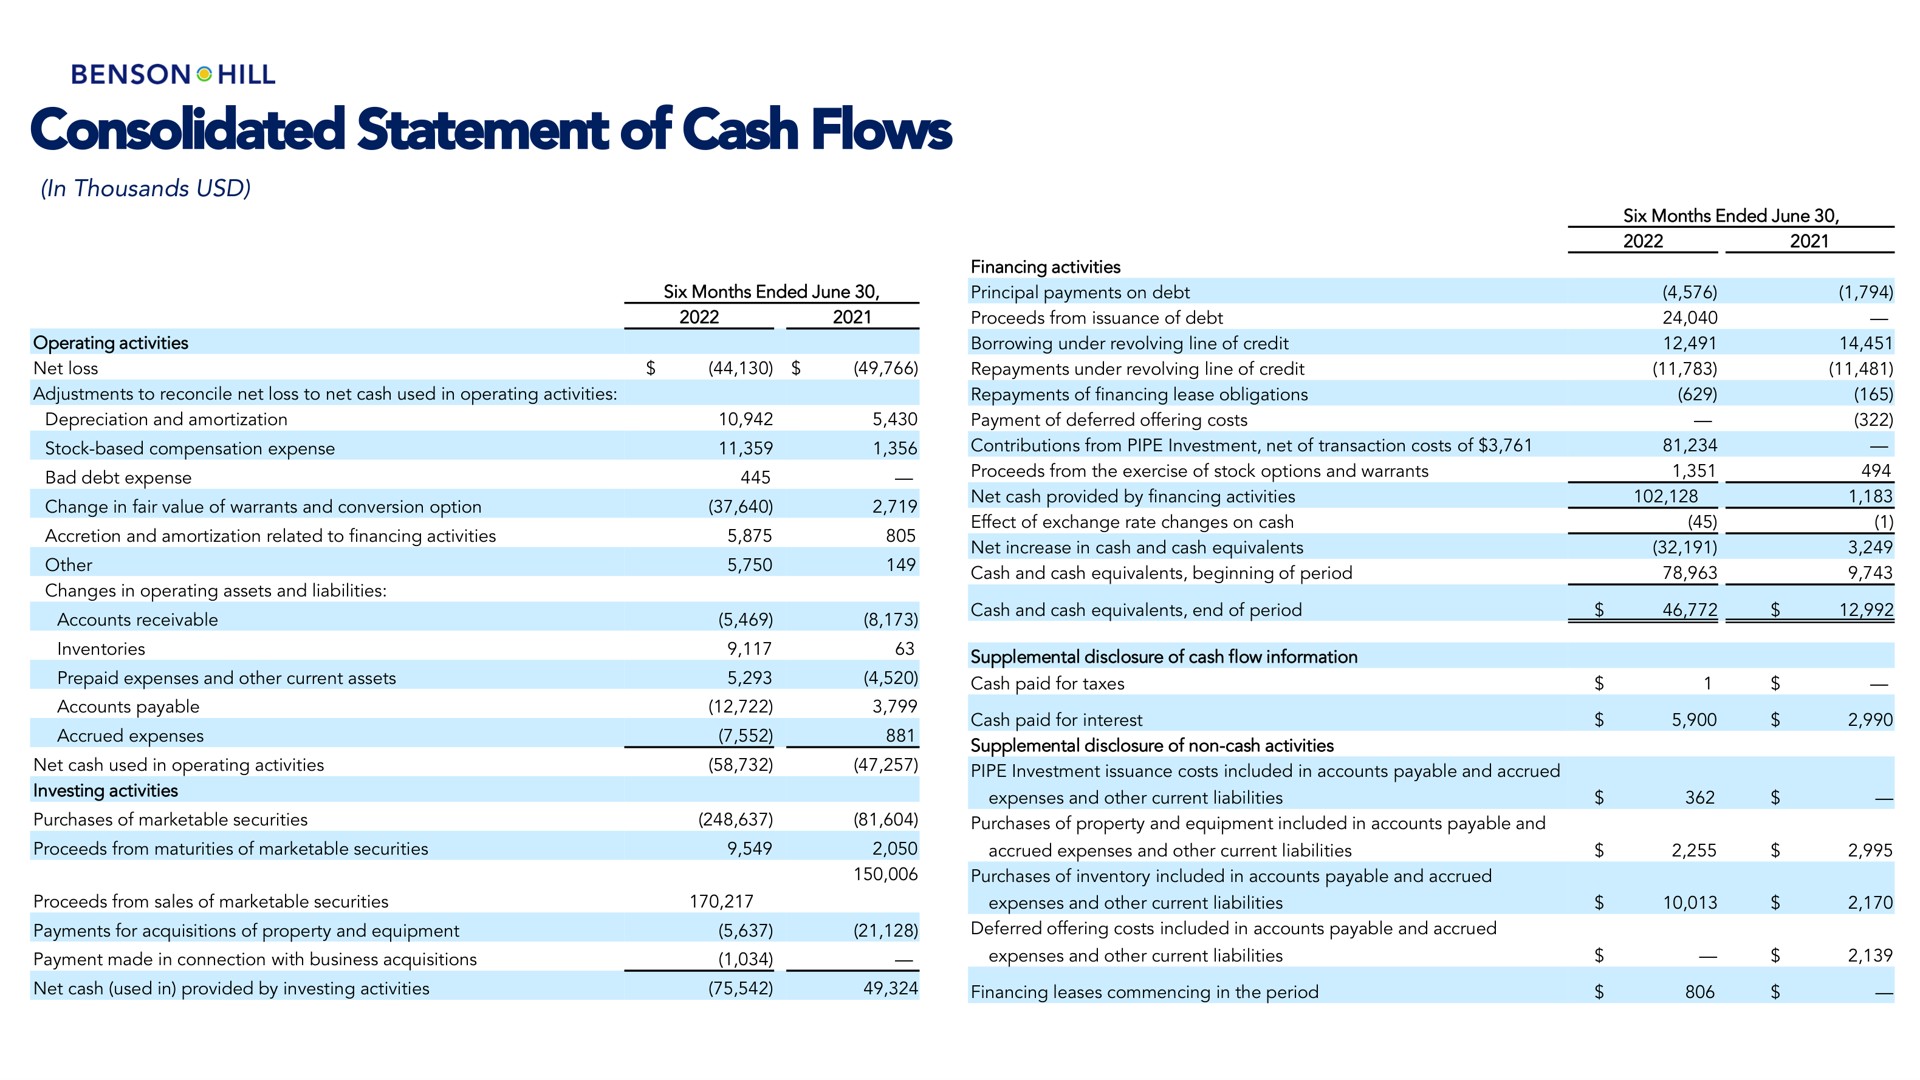 consolidated statement of cash flows | Benson Hill